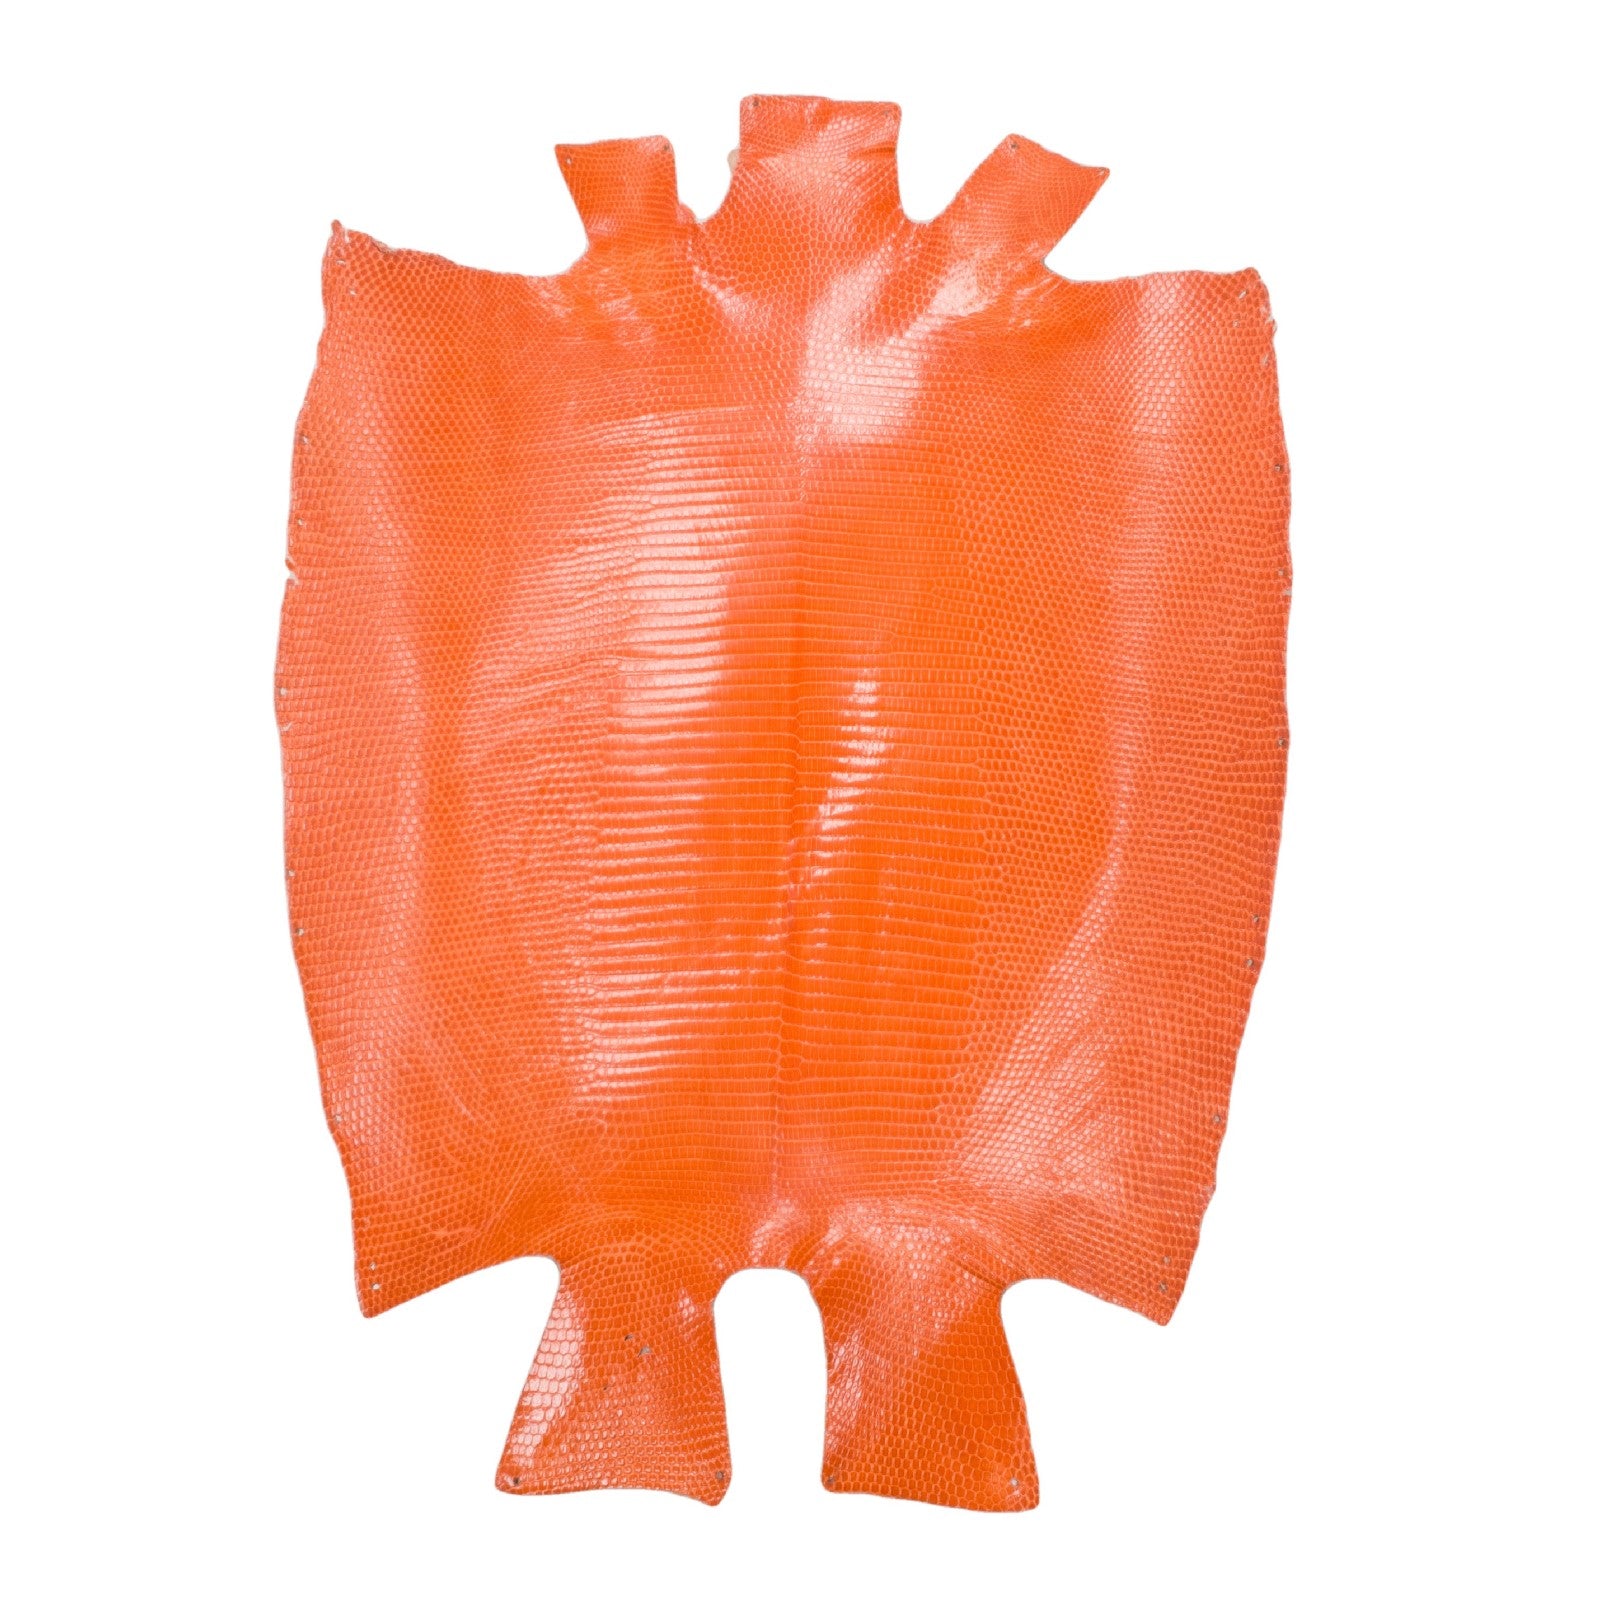 Solid Colored Lizard Skins, 1-2 oz, Outstanding Orange | The Leather Guy